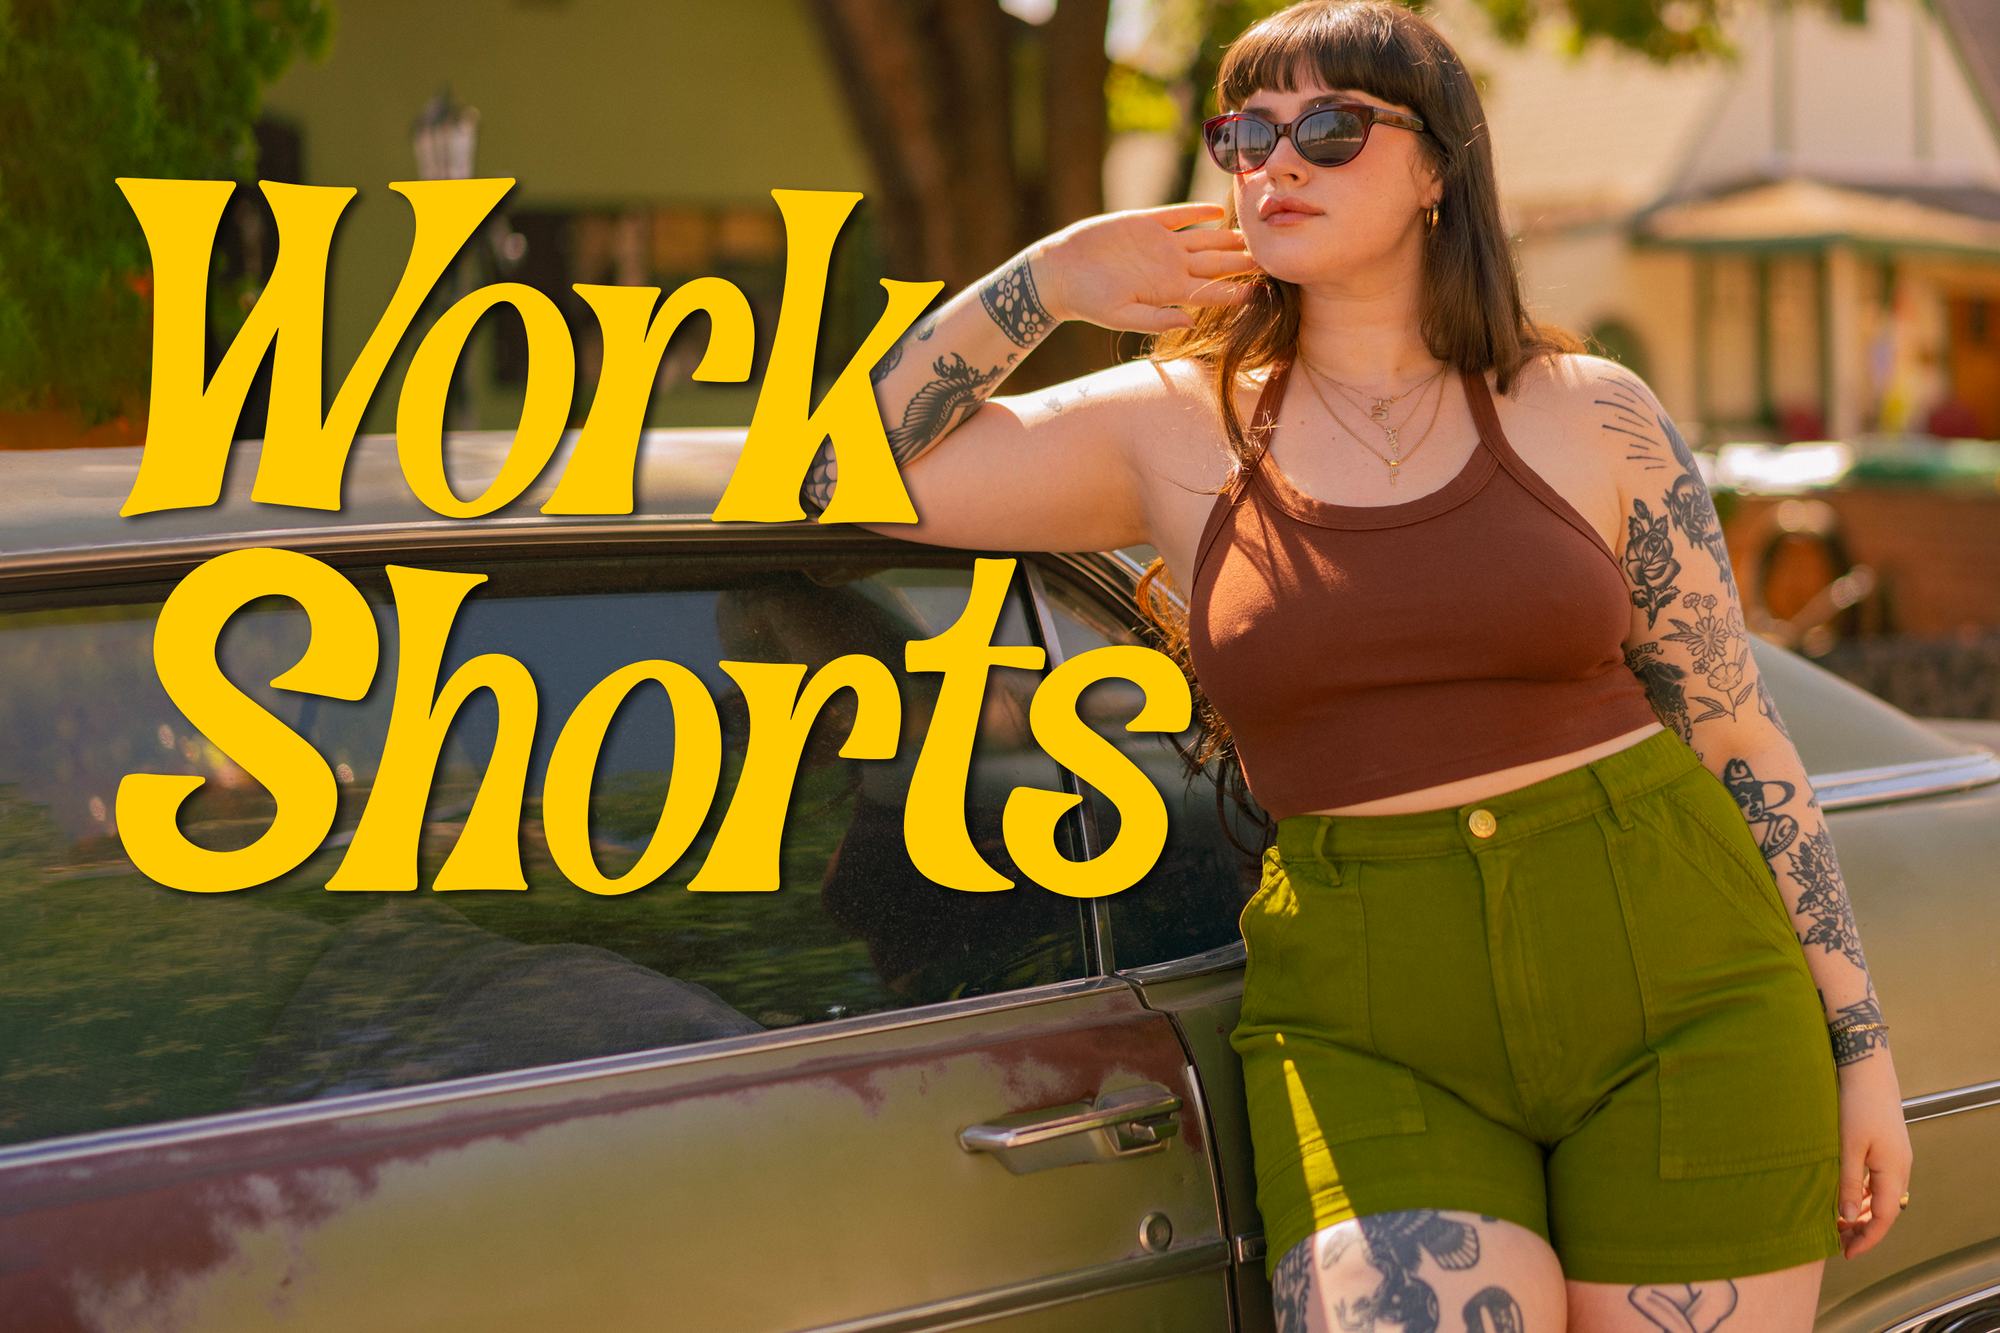 Sydney is wearing Work Shorts in Olive and Halter Top in Fudgesicle Brown